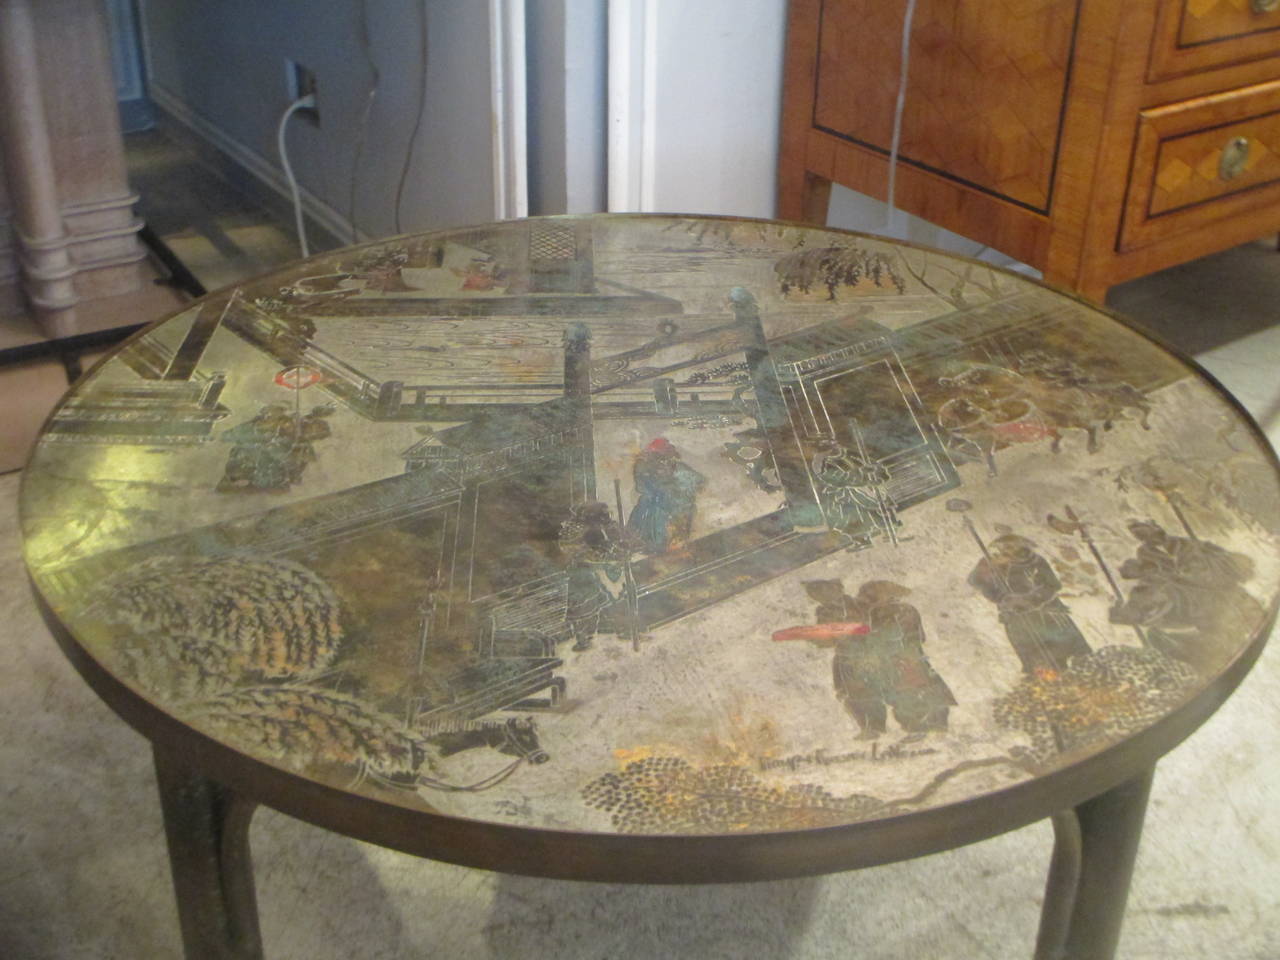 Philip and Kelvin LaVerne bronze patinated coffee table.

Philip and Kelvin LaVerne created one of a kind and limited edition pieces, often re-interpreting classical chinoiserie designs, as well as Egyptian, Greek and Etruscan illustrations. They